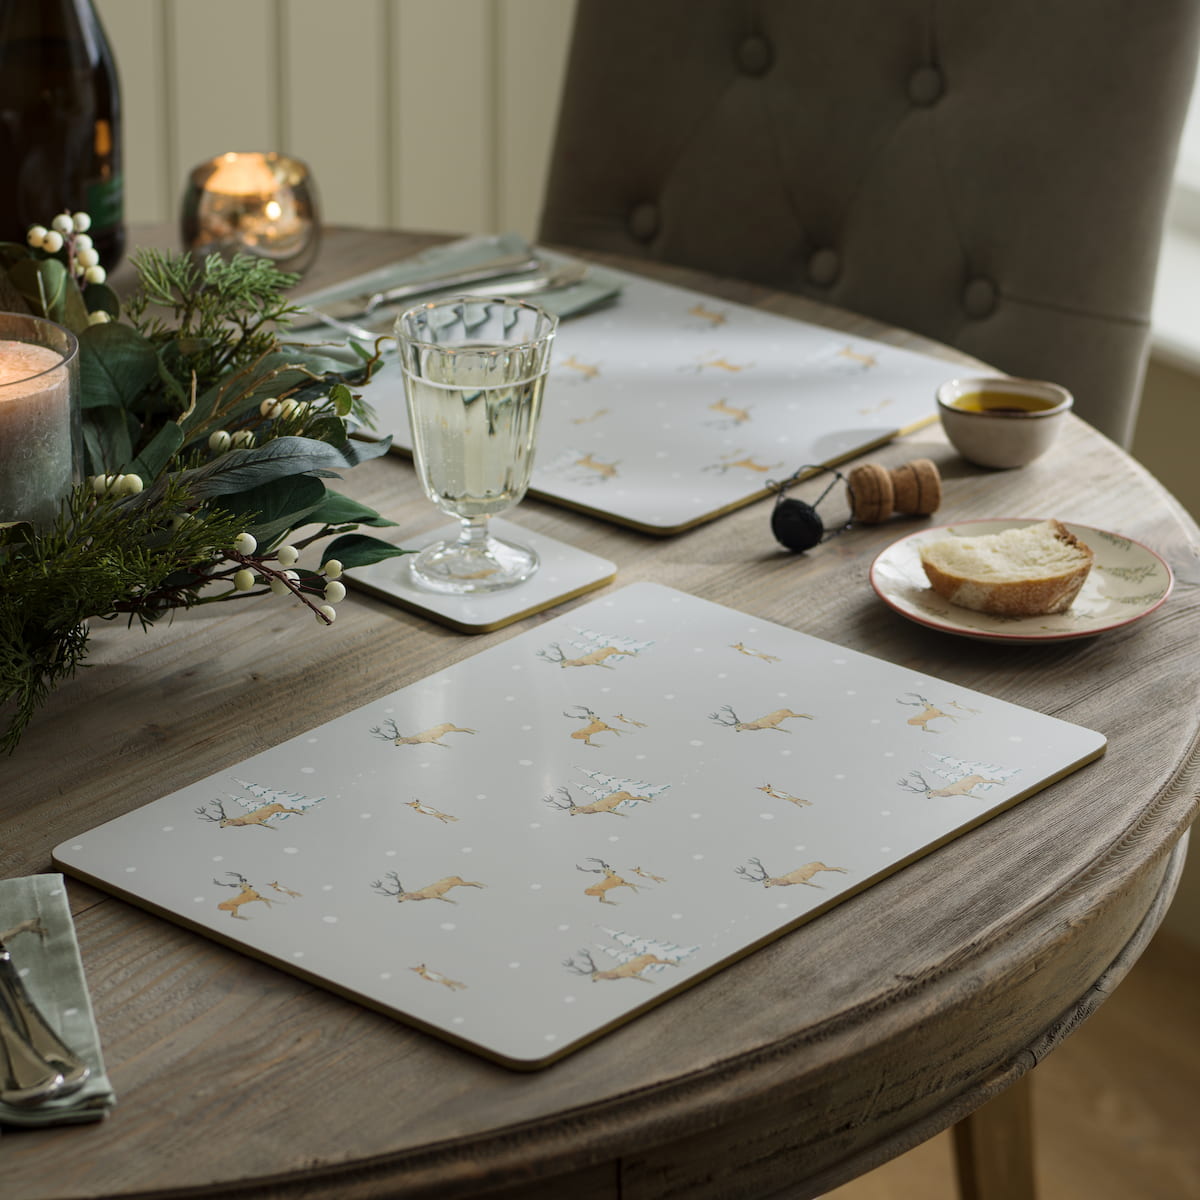 Christmas Stags Extra Large Placemats (Set of 2)